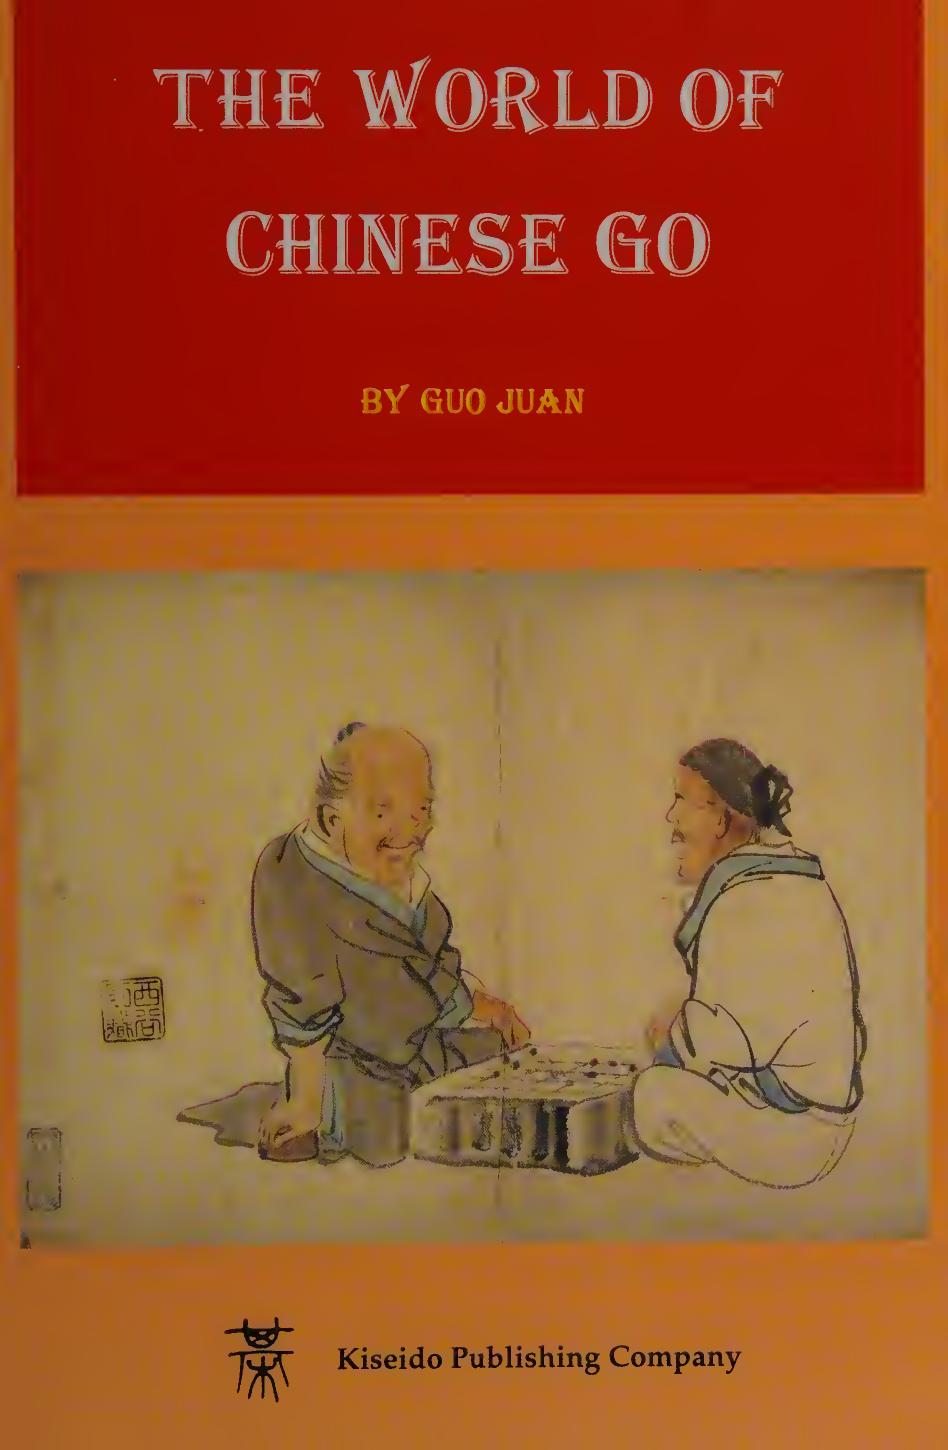 The World of Chinese Go : Some Stories about Chinese Go from 1970 by Guo Juan